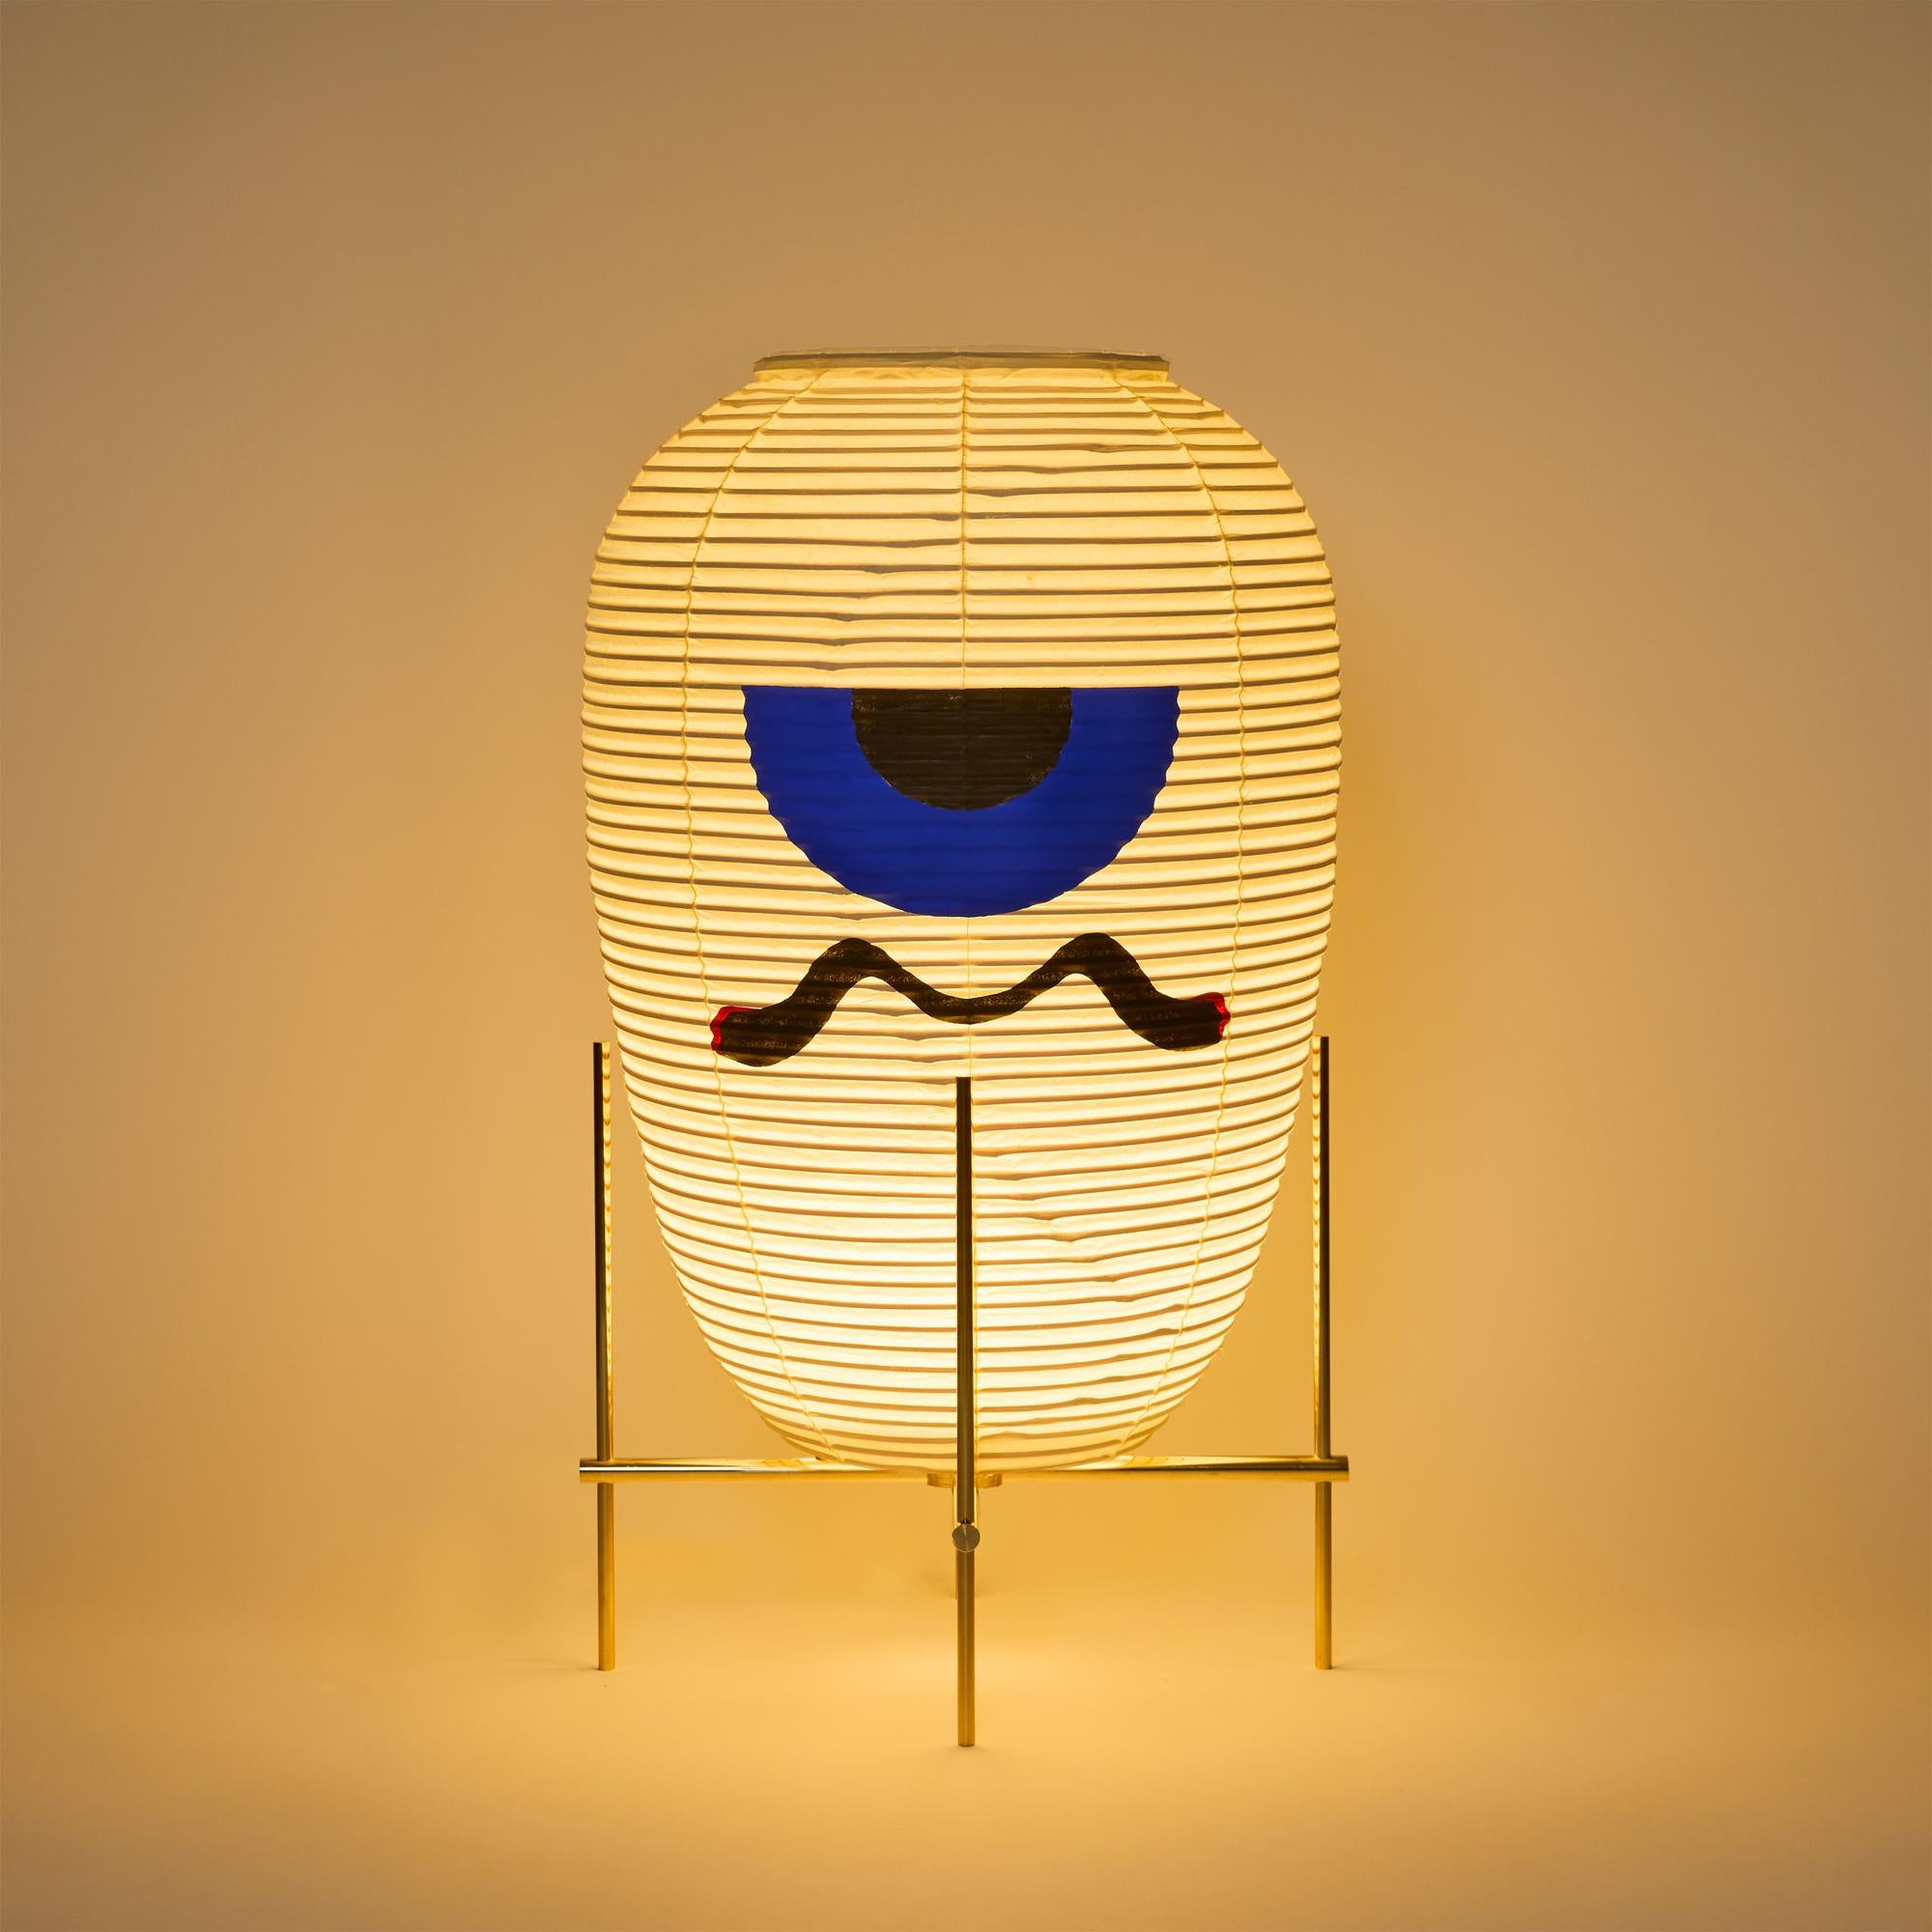 Name: OBAKE UN
Contemporary style Japanese Washi Japanese traditional paper shade floor lamp. Washi shade is famous as Isamu Noguchi Akari lightings. 
Base is made of brass. Limited pattern painted model. Edition of 3+1AP

E26,27 light